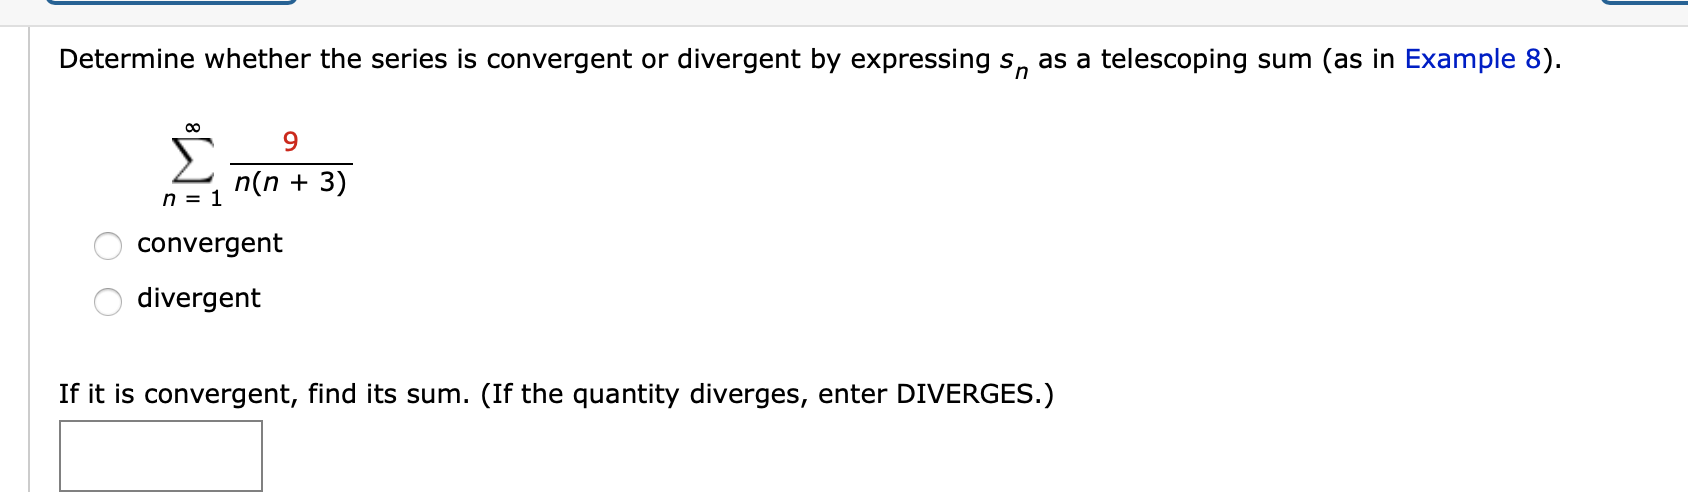 Determine whether the series is convergent or divergent by expressing s, as a telescoping sum (as in Example 8).
9.
Σ
n(n + 3)
n = 1
convergent
divergent
If it is convergent, find its sum. (If the quantity diverges, enter DIVERGES.)
